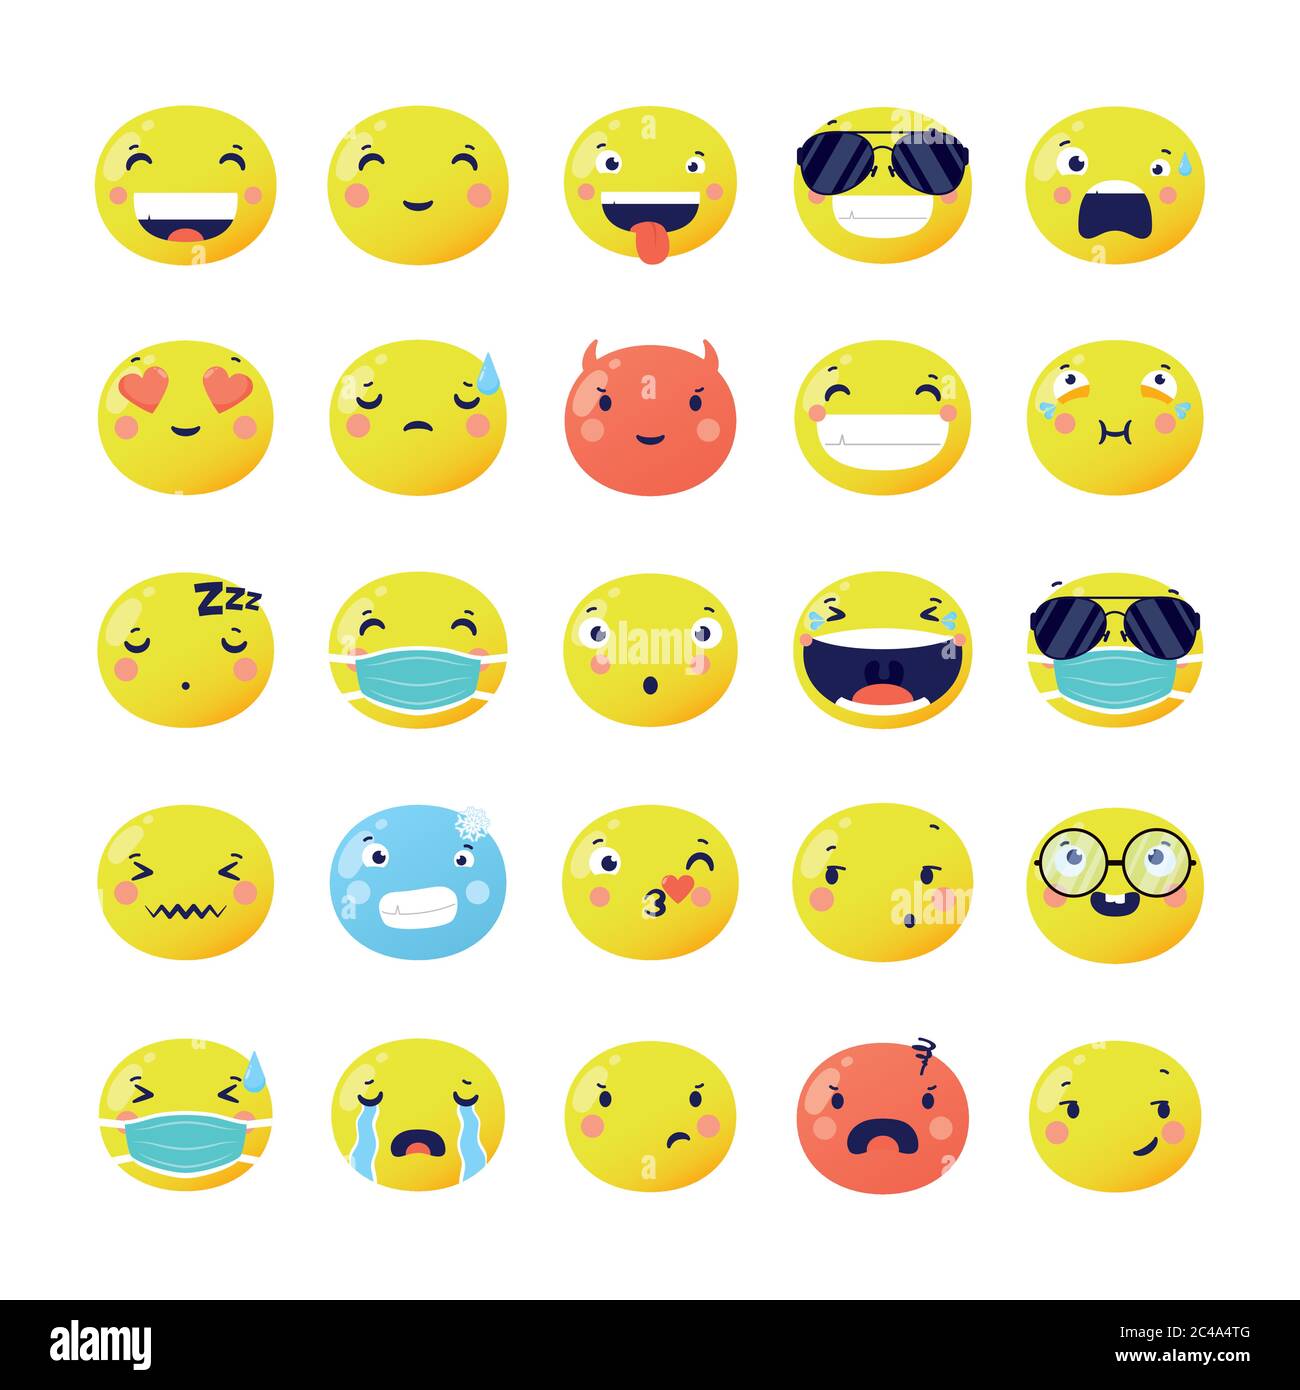 set of emojis faces funny characters vector illustration design Stock Vector